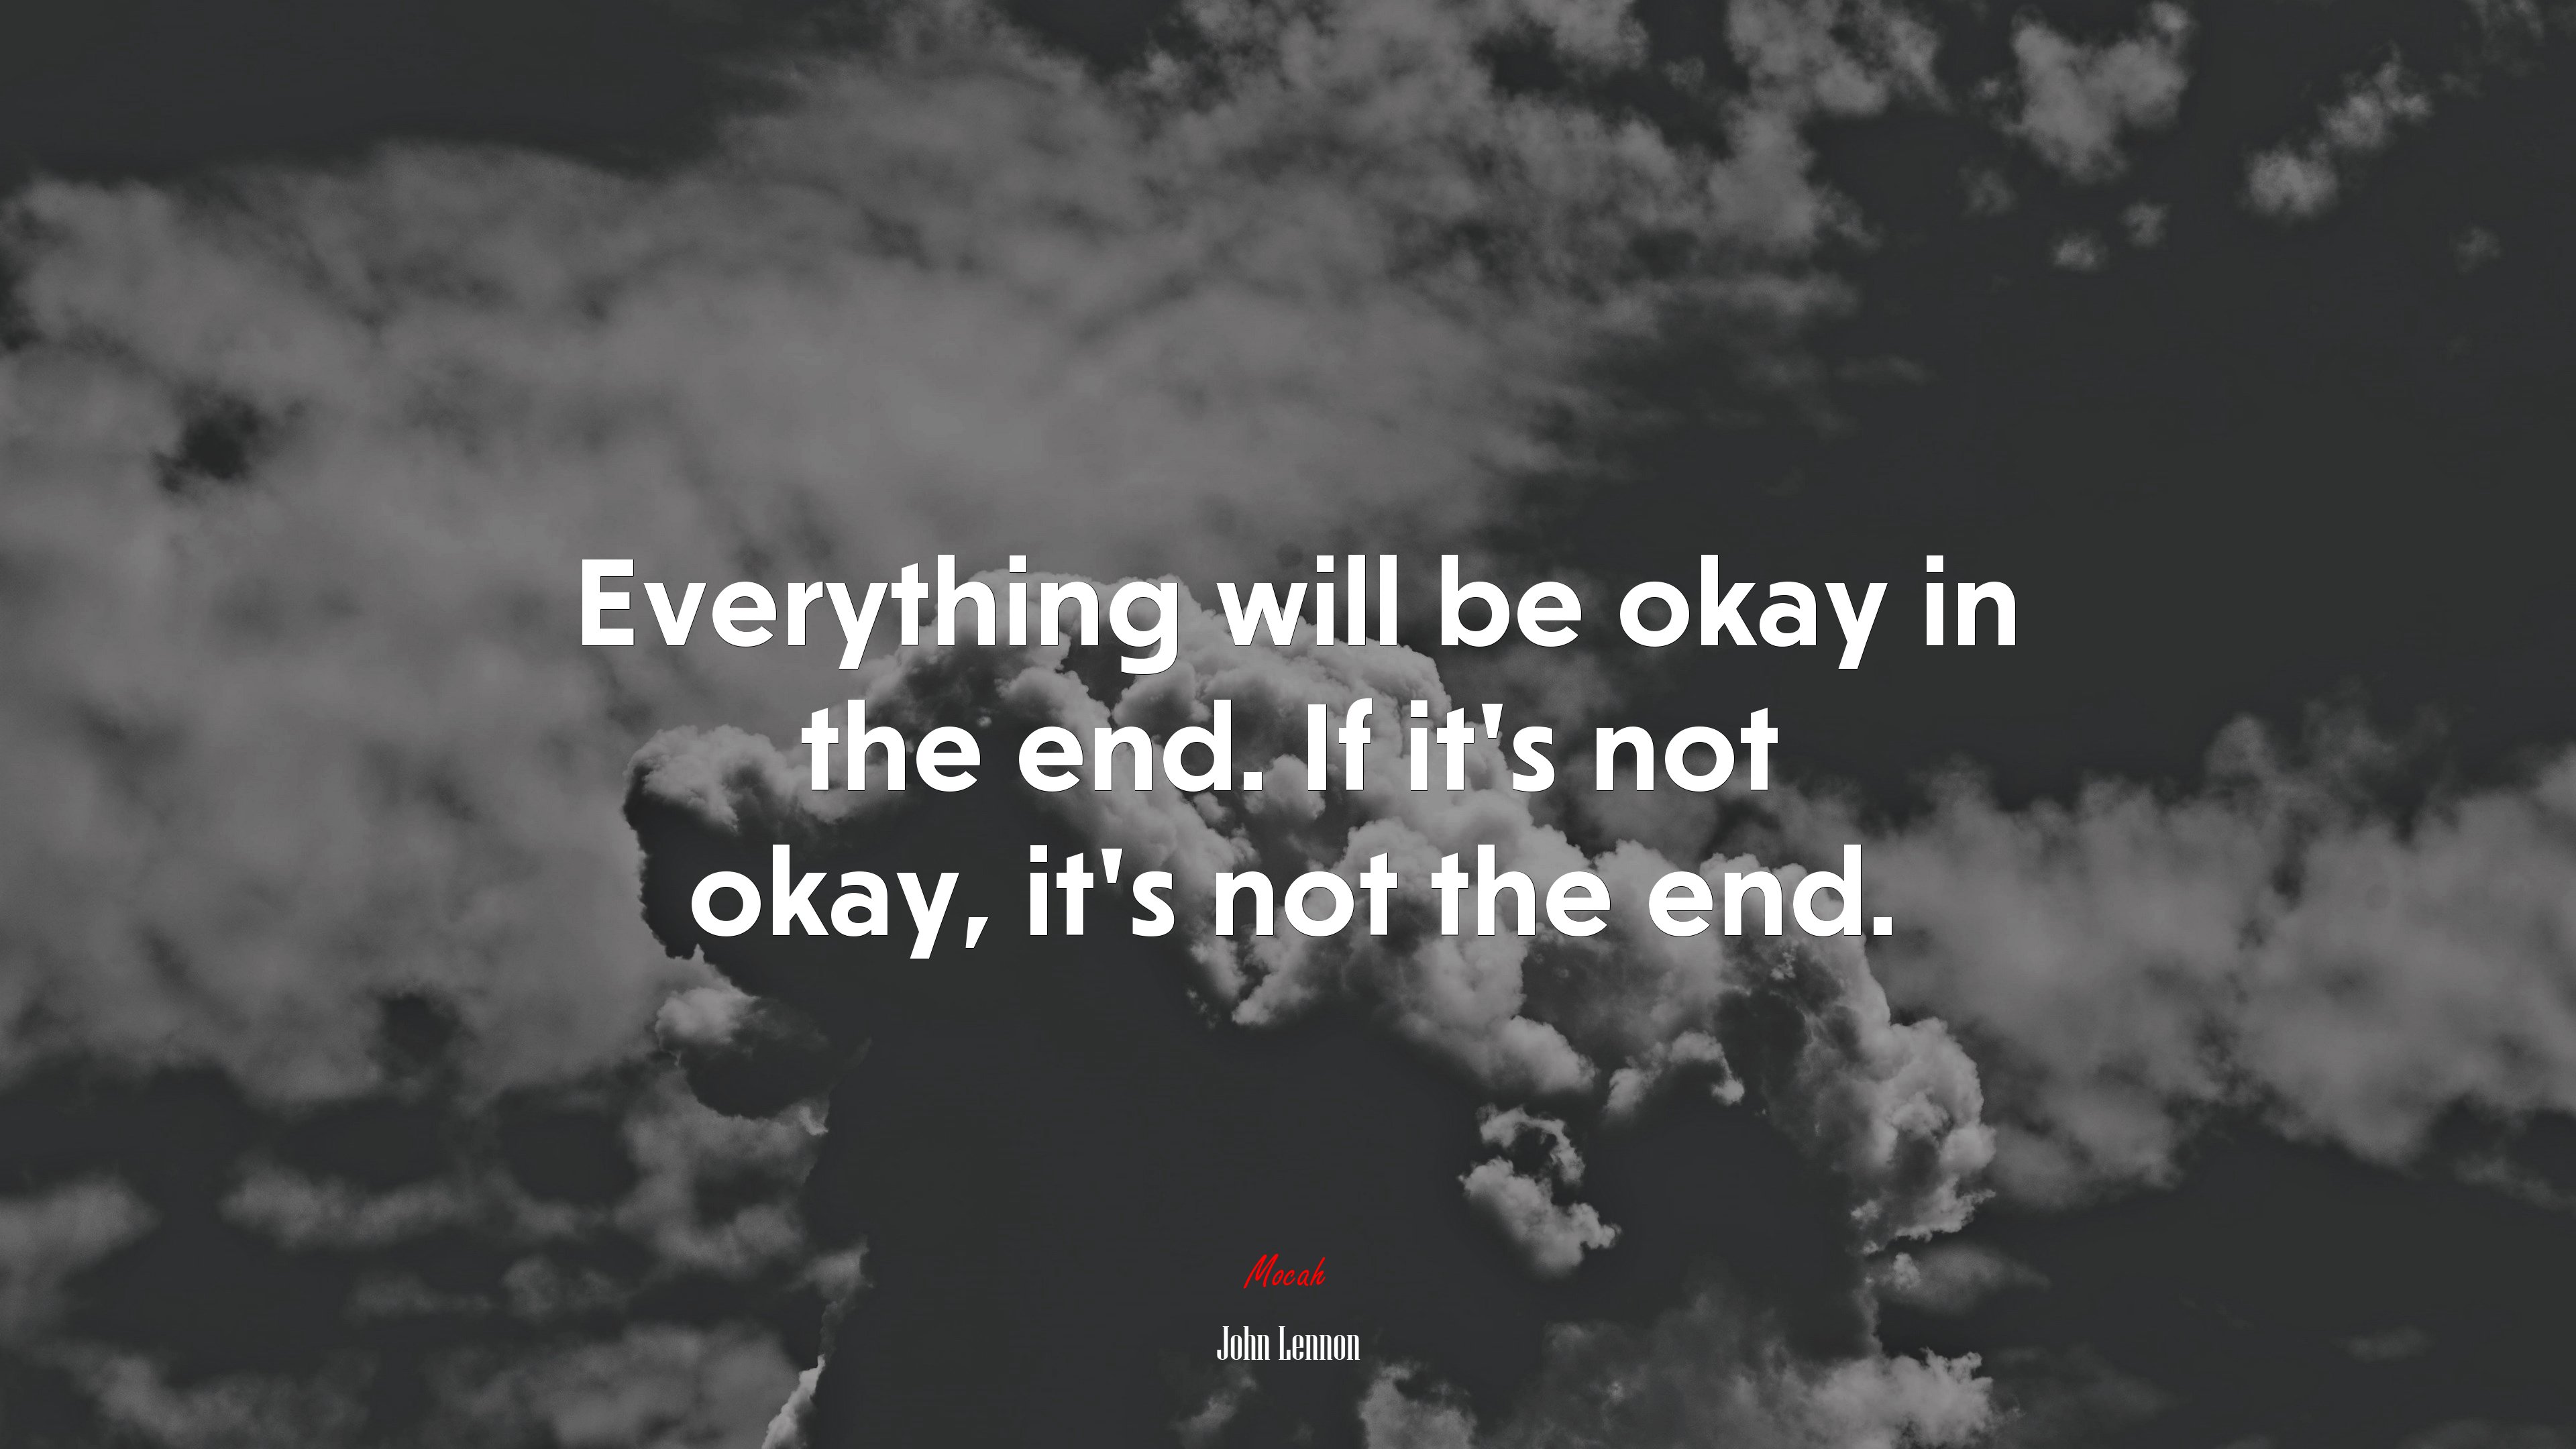 Everything will be okay in the end. If its not okay, its not the end. John Lennon quote Gallery HD Wallpaper